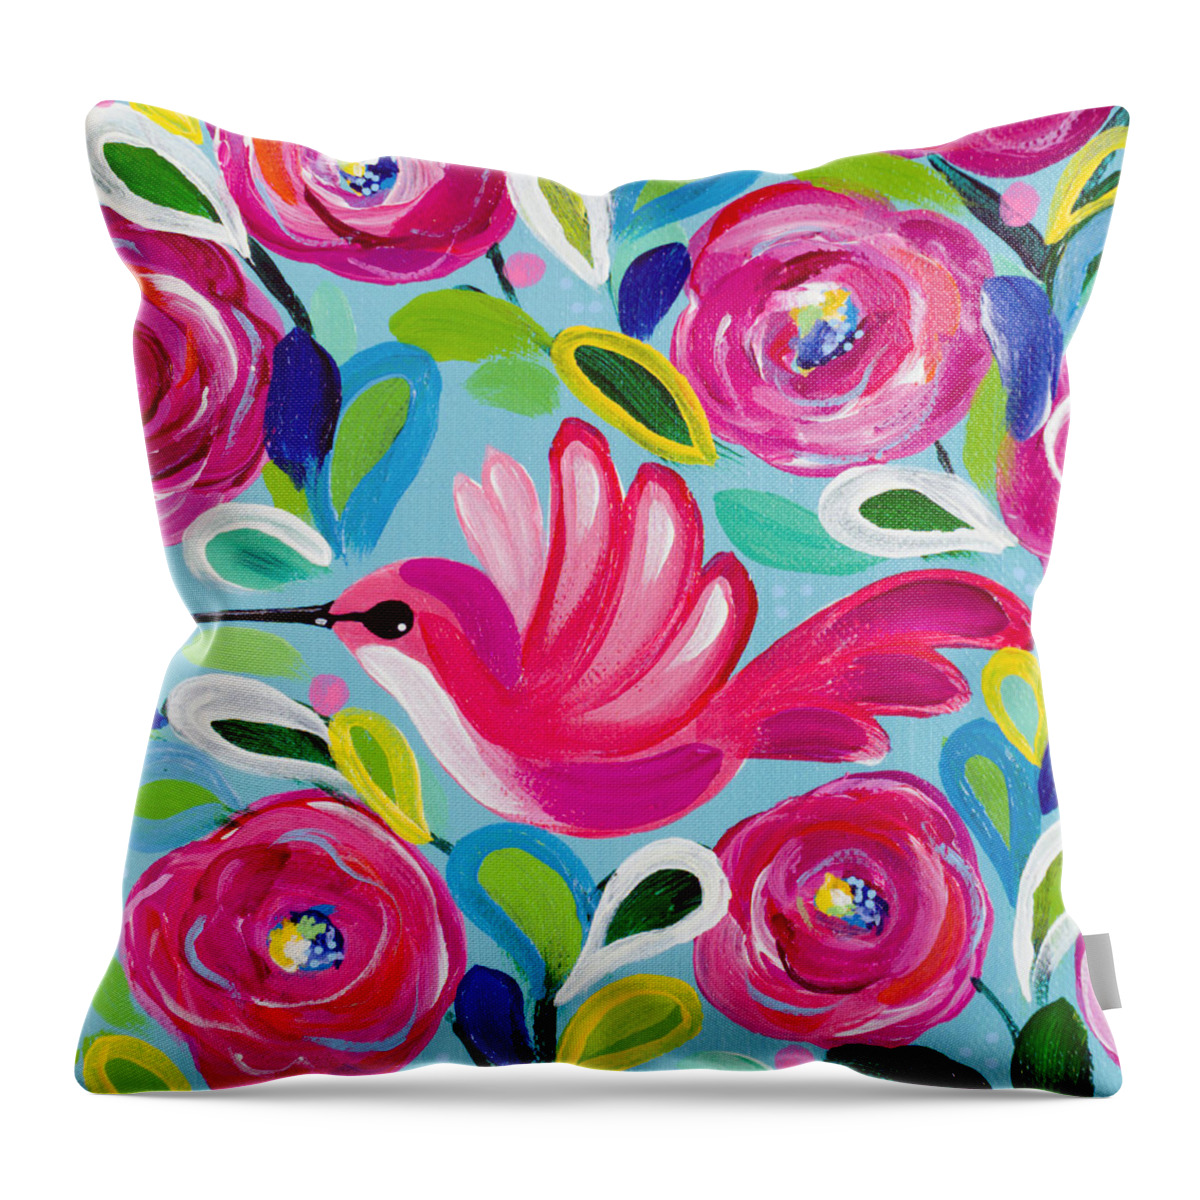 Hummingbird Throw Pillow featuring the painting Happy Place by Beth Ann Scott